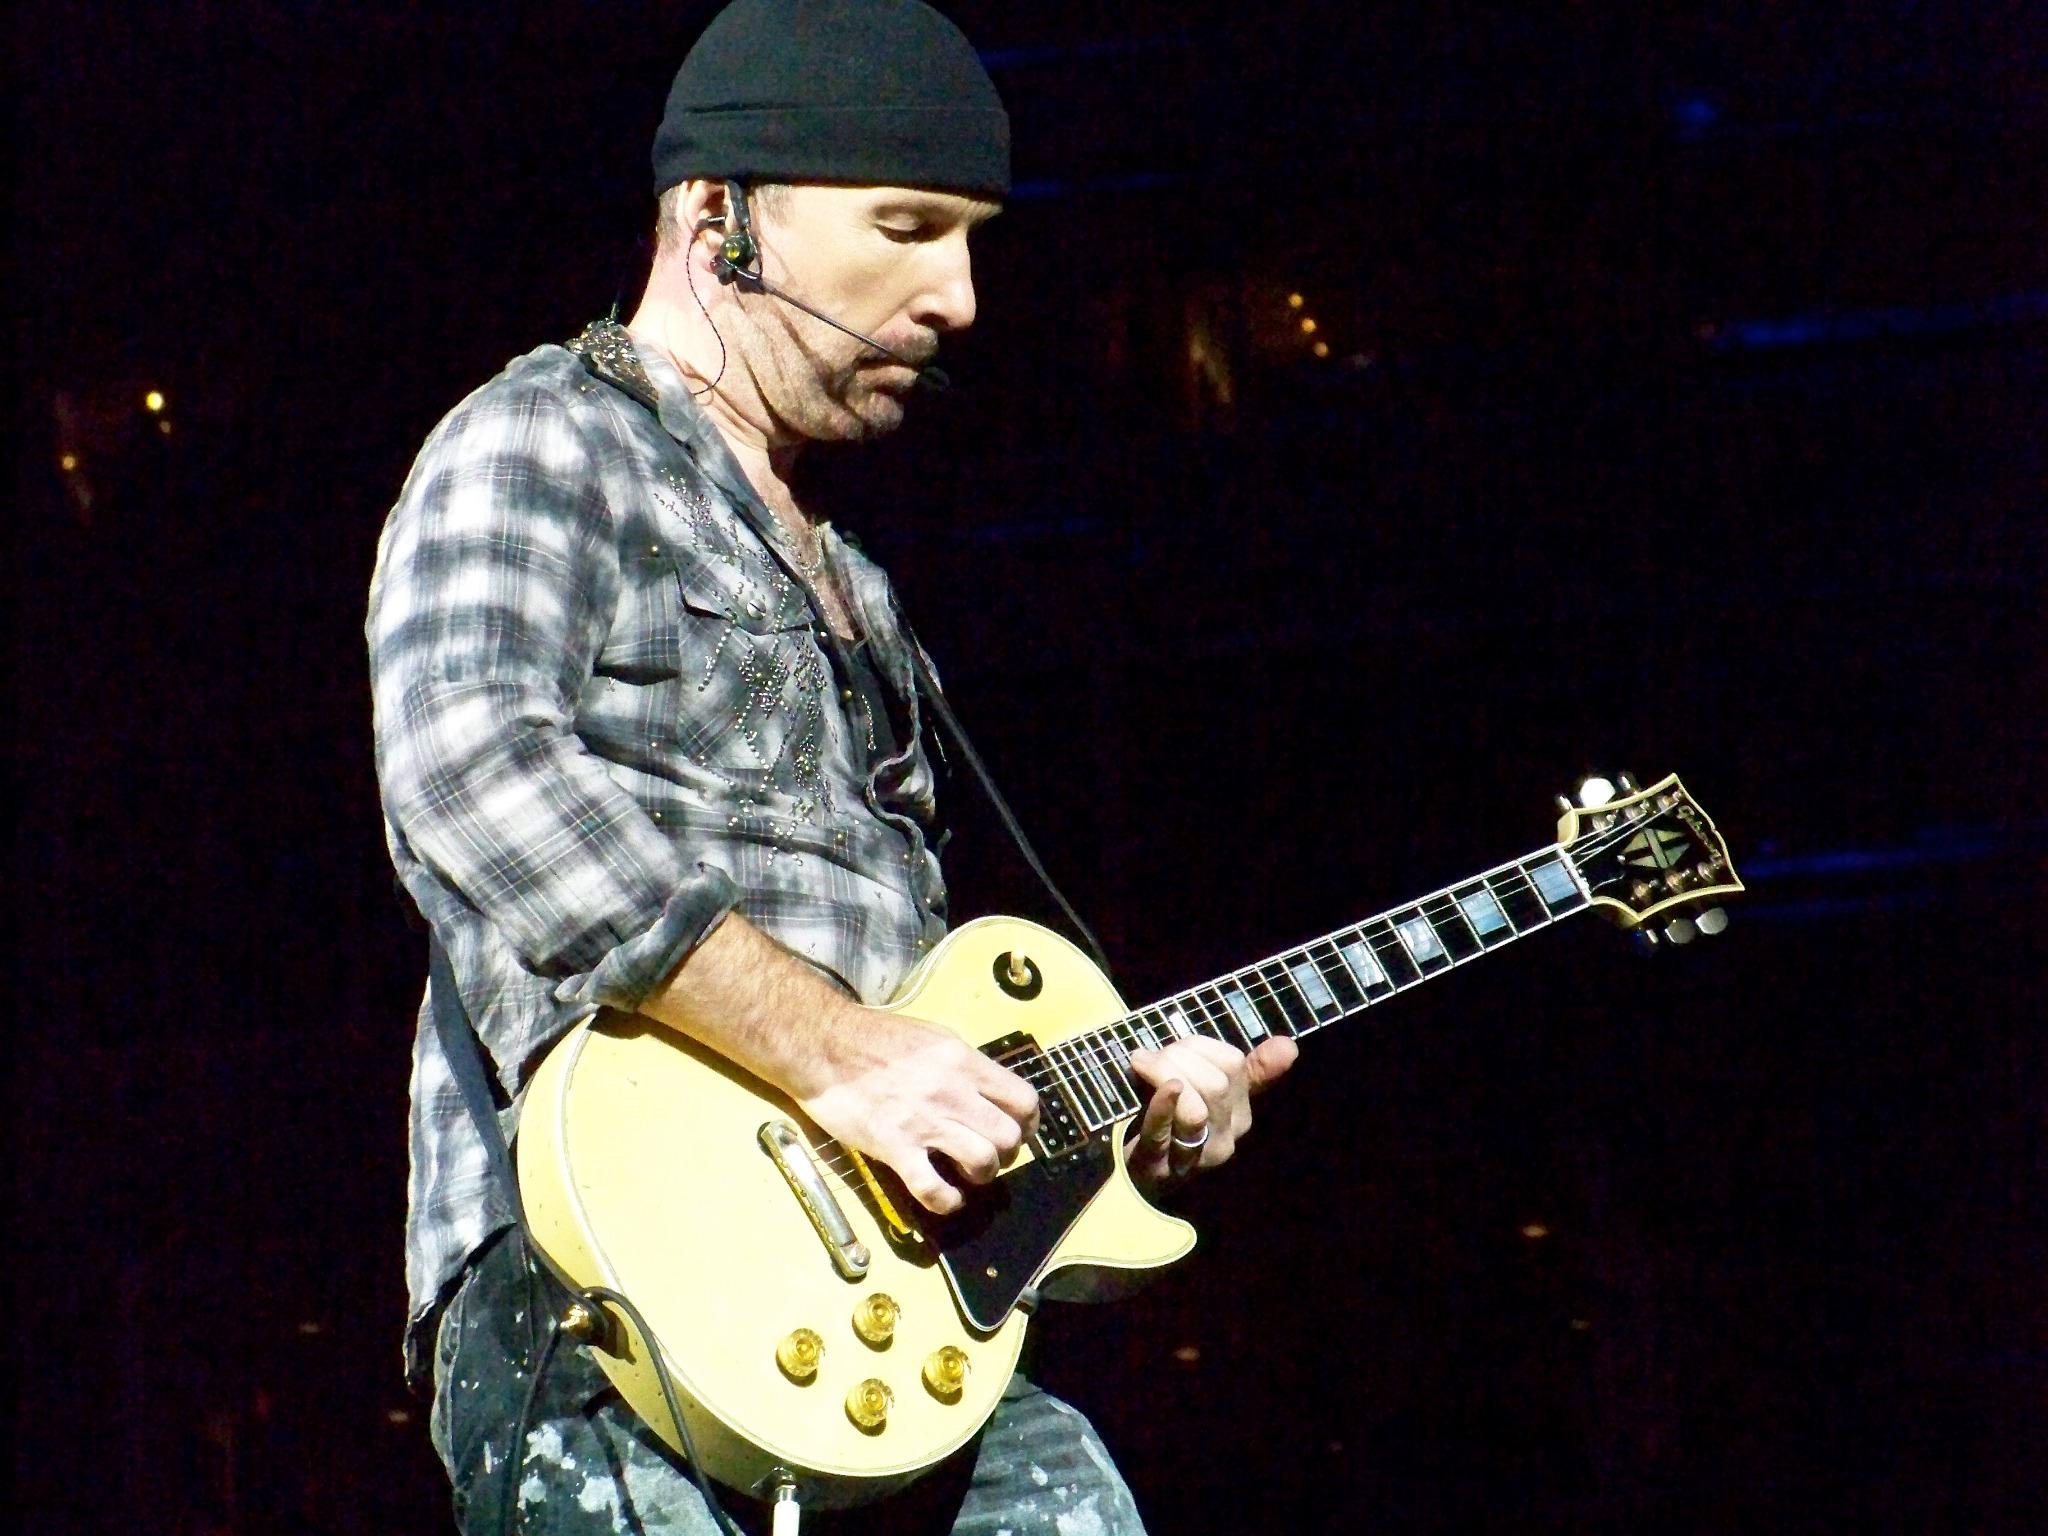 Happy Birthday to The Edge of How does he do it? Click here to find out: 